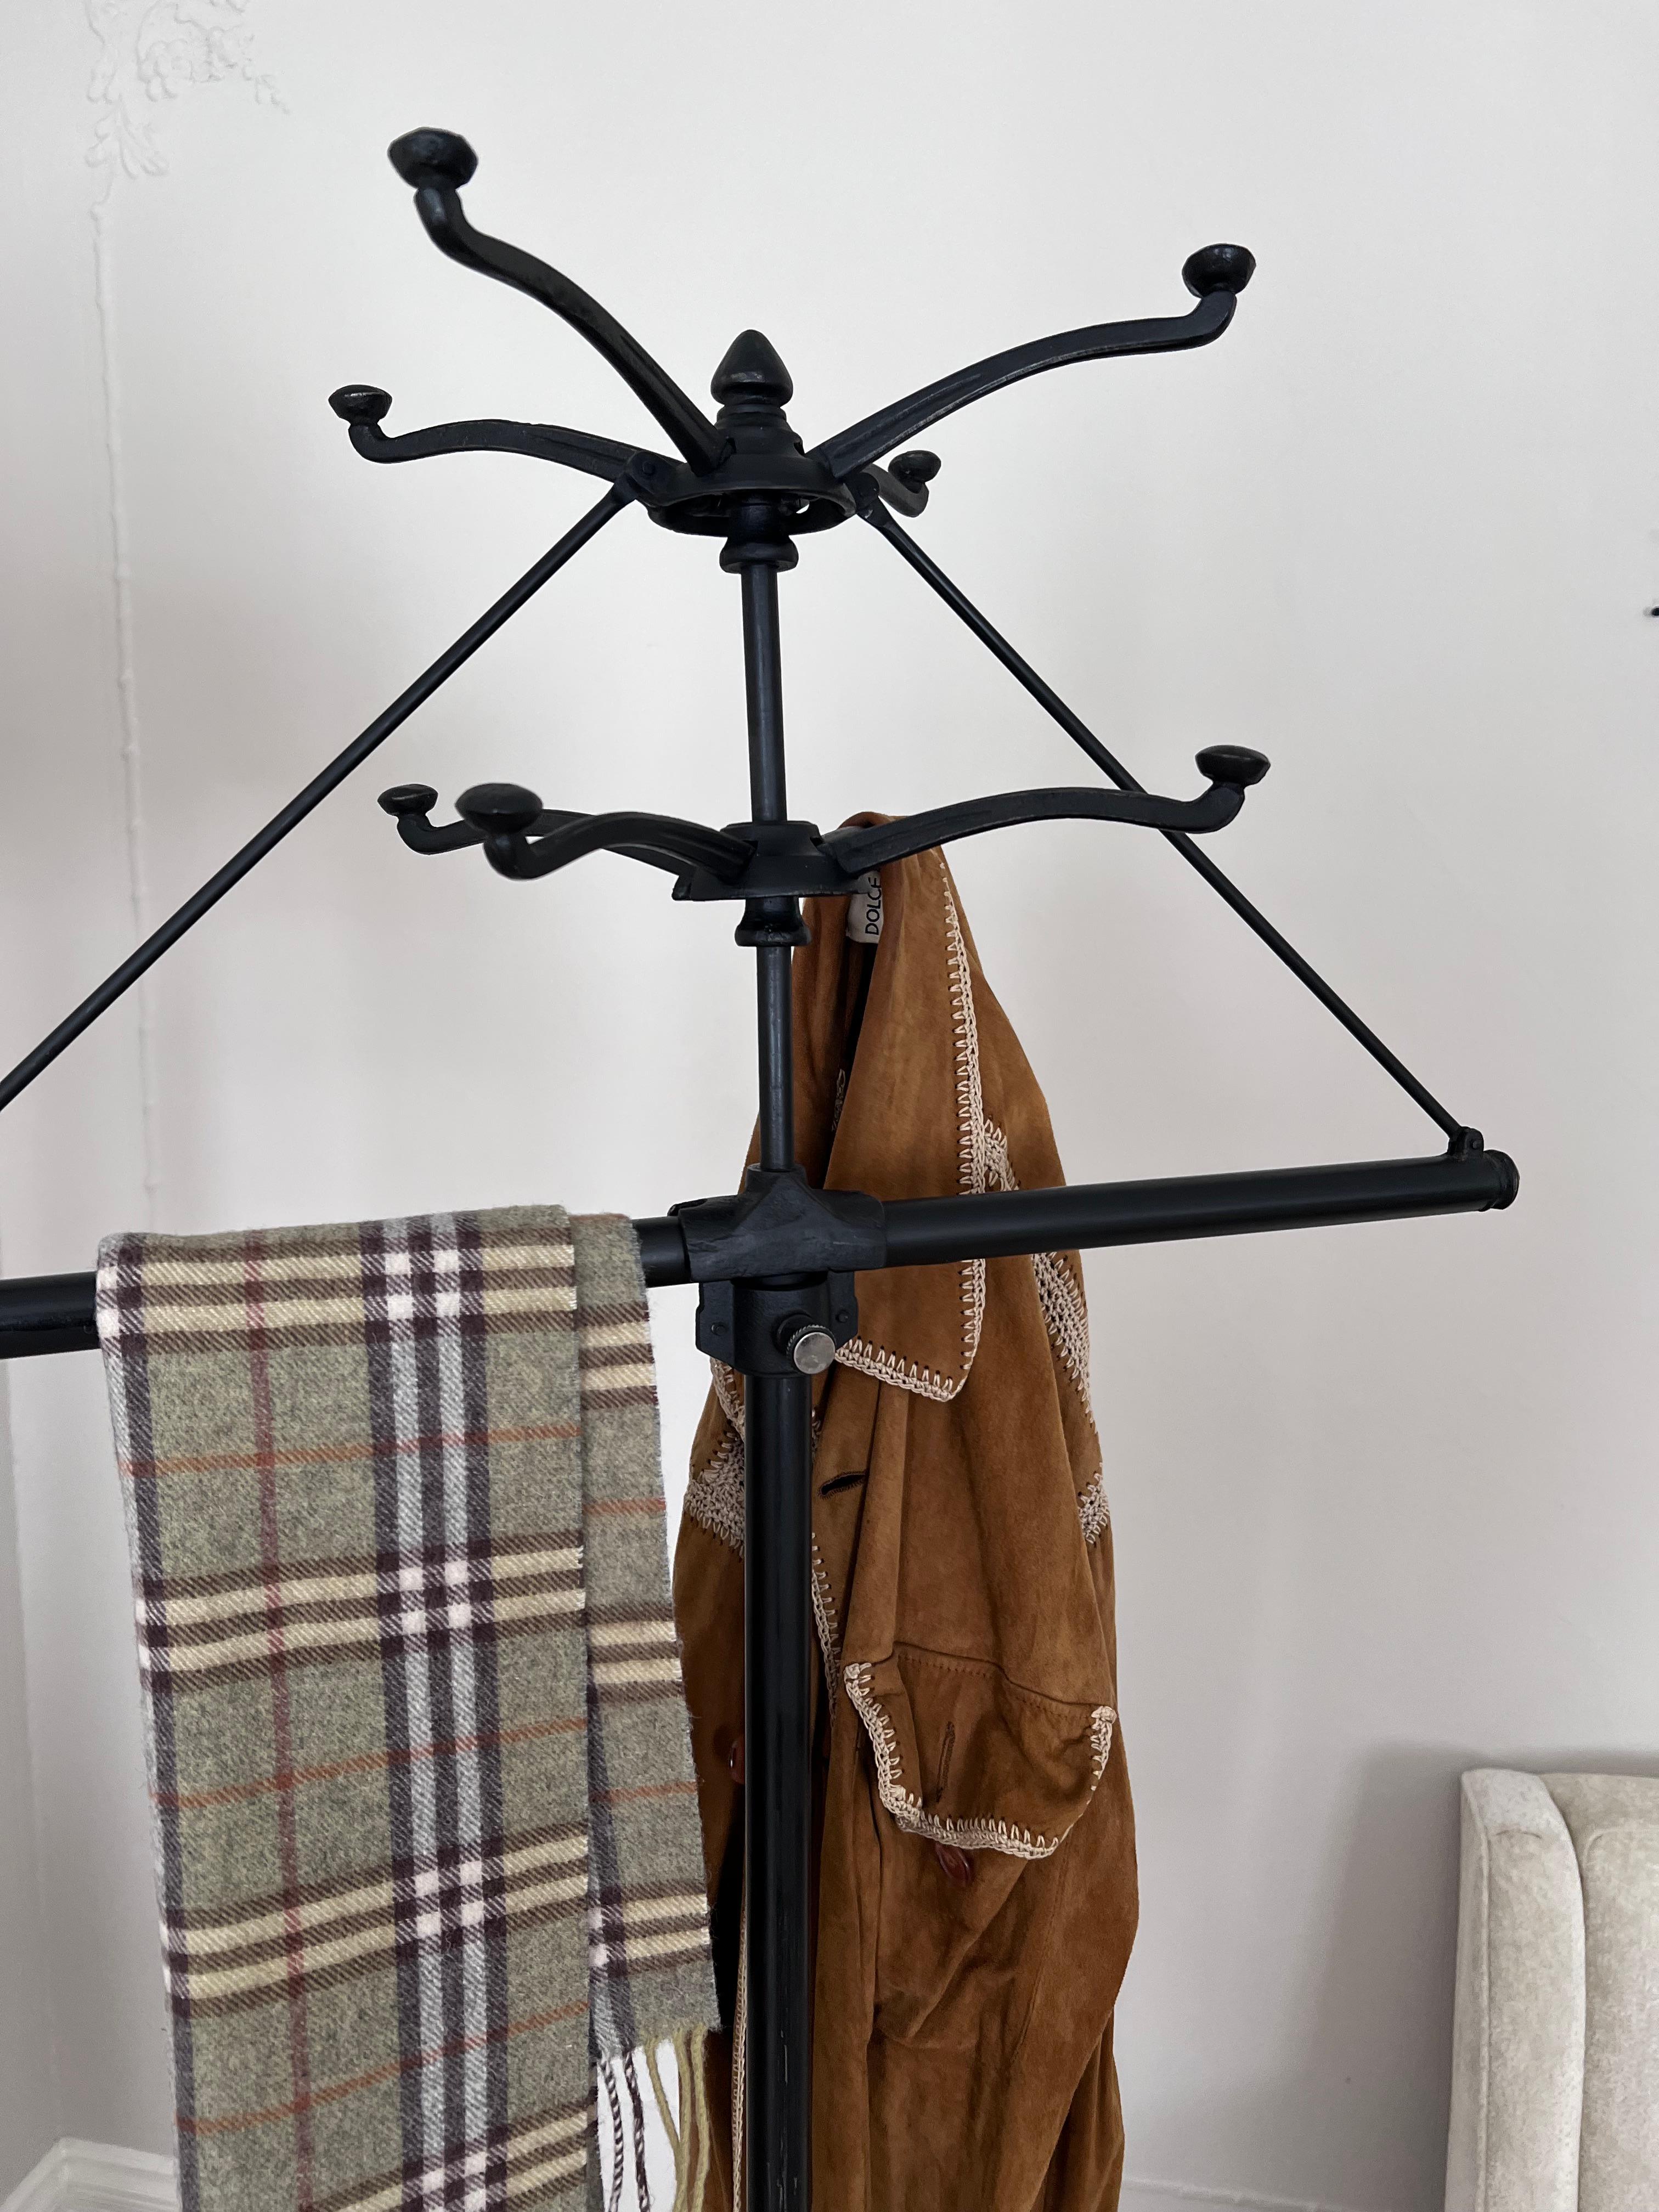 A remarkably convenient, portable, collapsable, Coat or Hat Rack. The piece, from the 1930's is made of metal and iron - the height comes apart making it half the height for storage and all pieces collapse for easy traveling. 

This unit could be